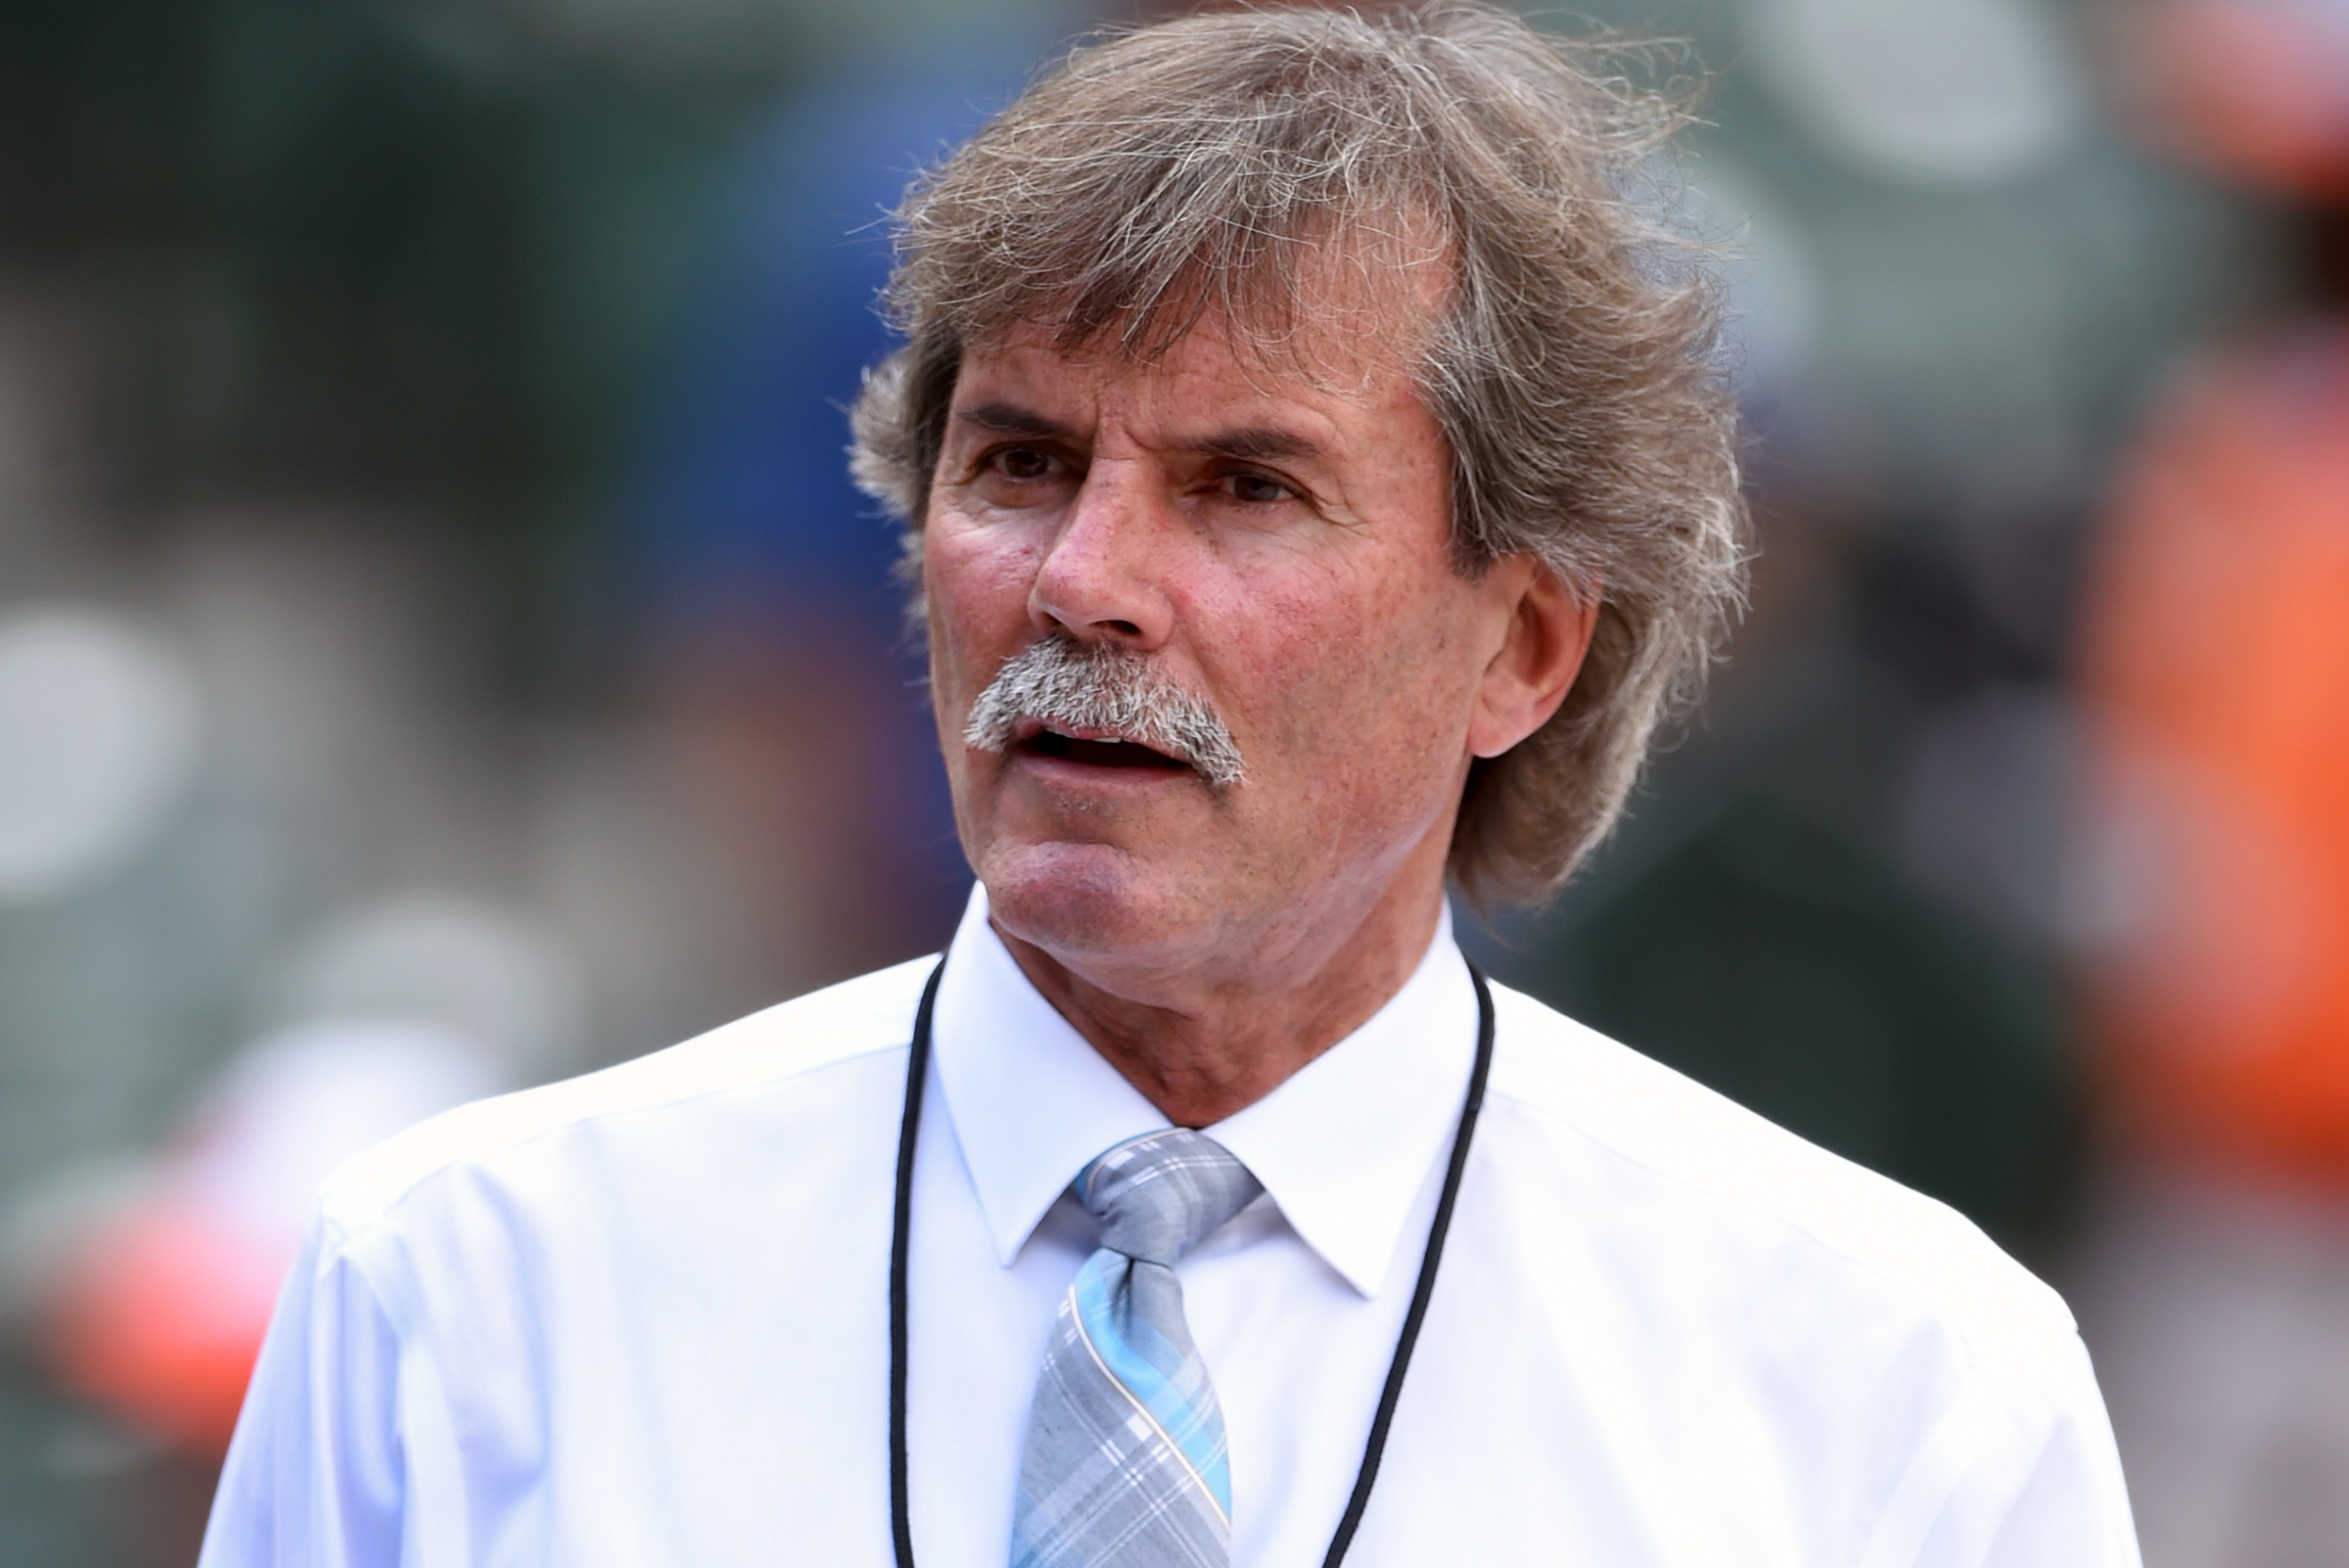 Morning sports update: Dennis Eckersley says that he was 'humliated' after  the incident with David Price